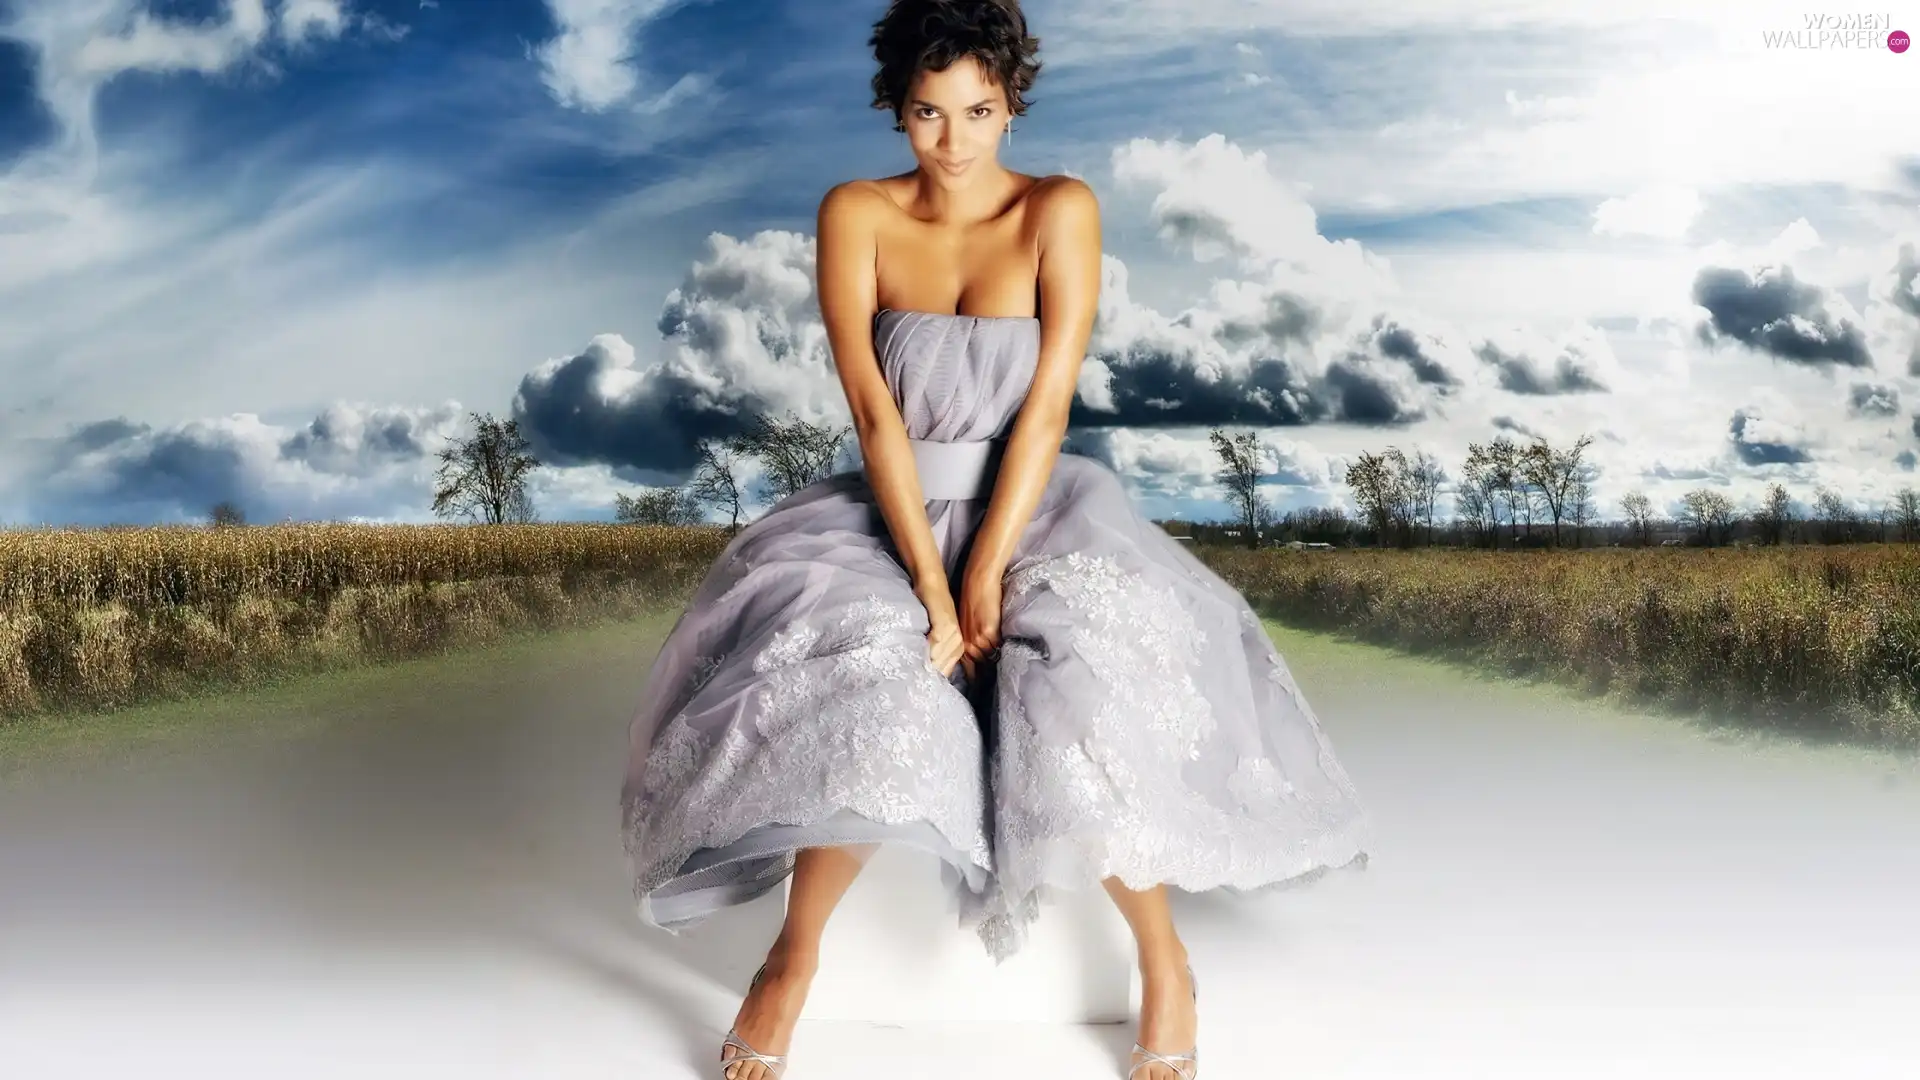 Halle Berry, actress